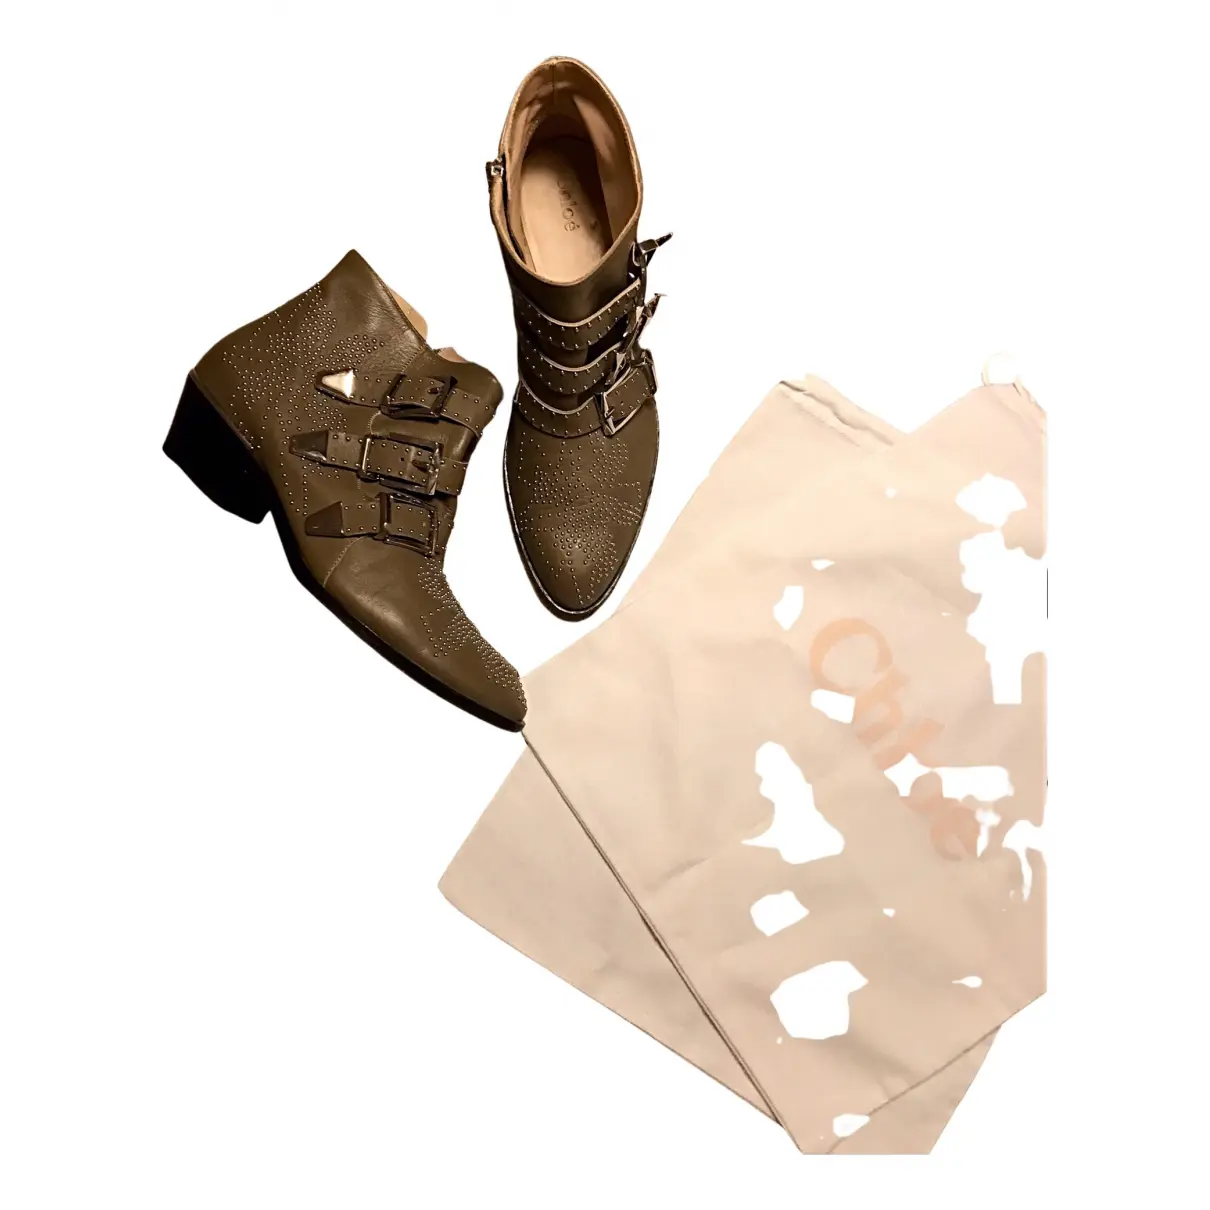 Buy Chloé Susanna leather buckled boots online